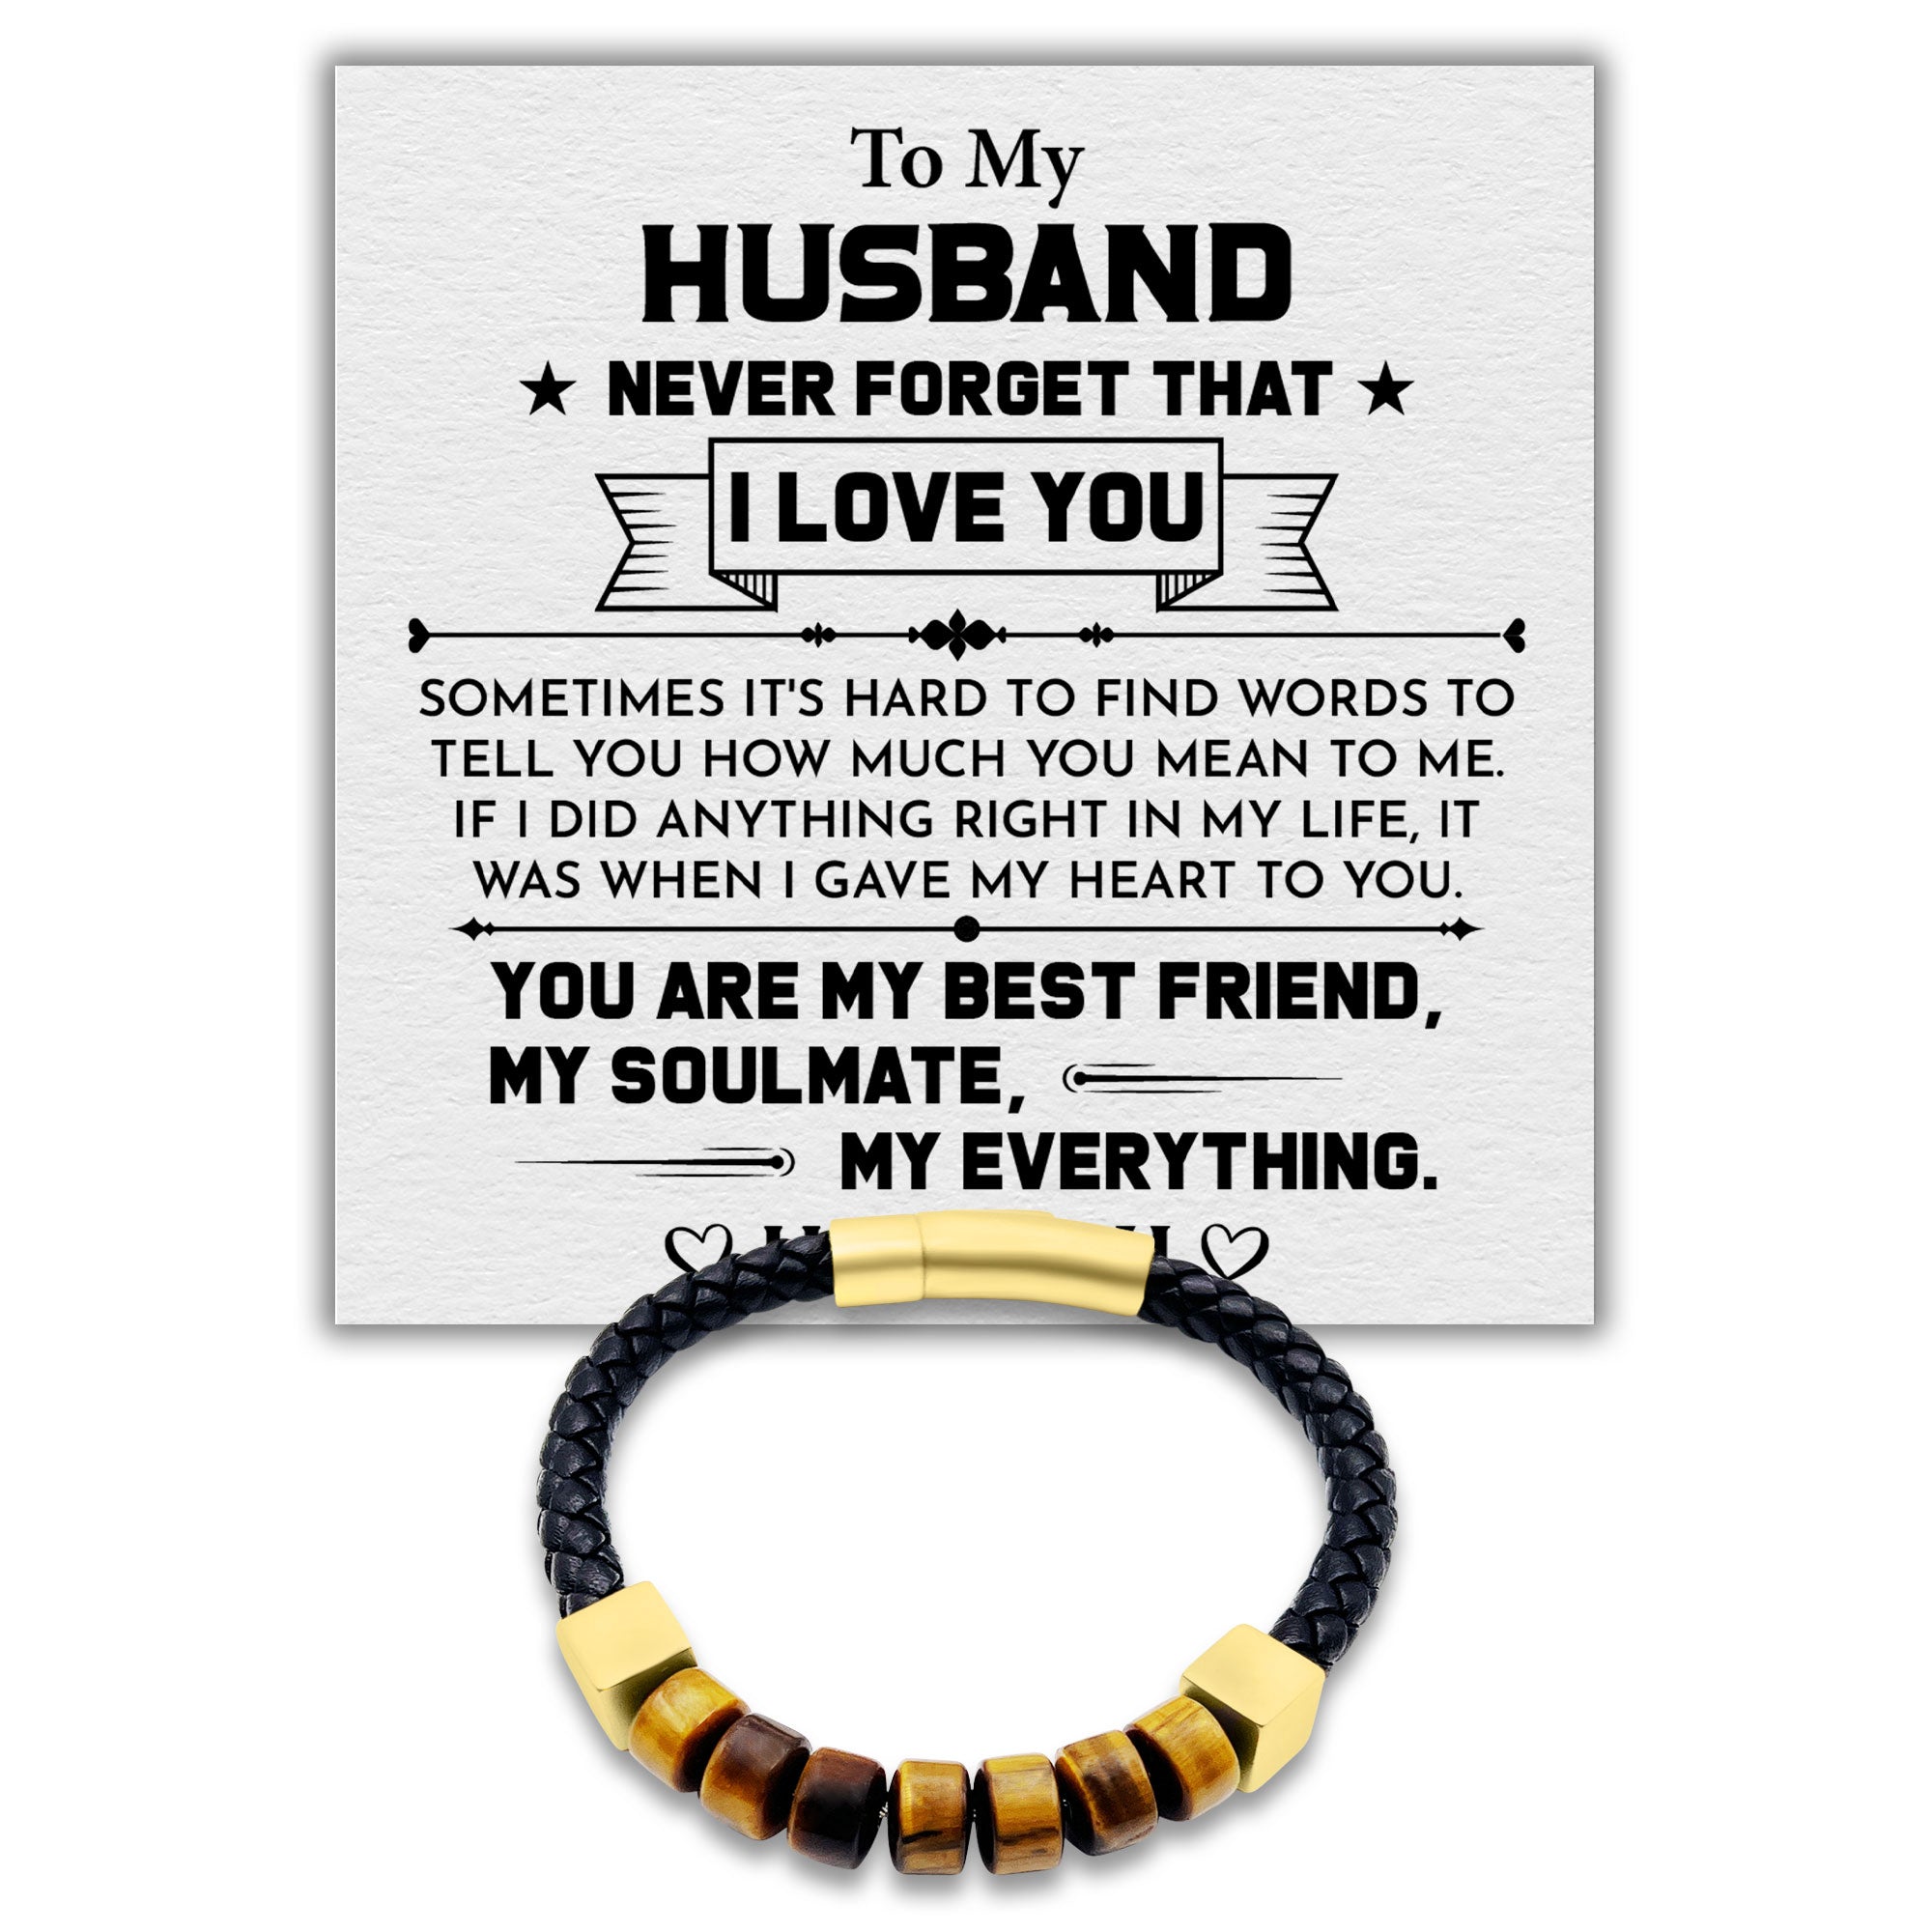 To my Husband You Are My Best friend - Premium Tiger’s Eye Woven Black Italian Leather & Gold Stainless Steel Cubed Bracelet for Men